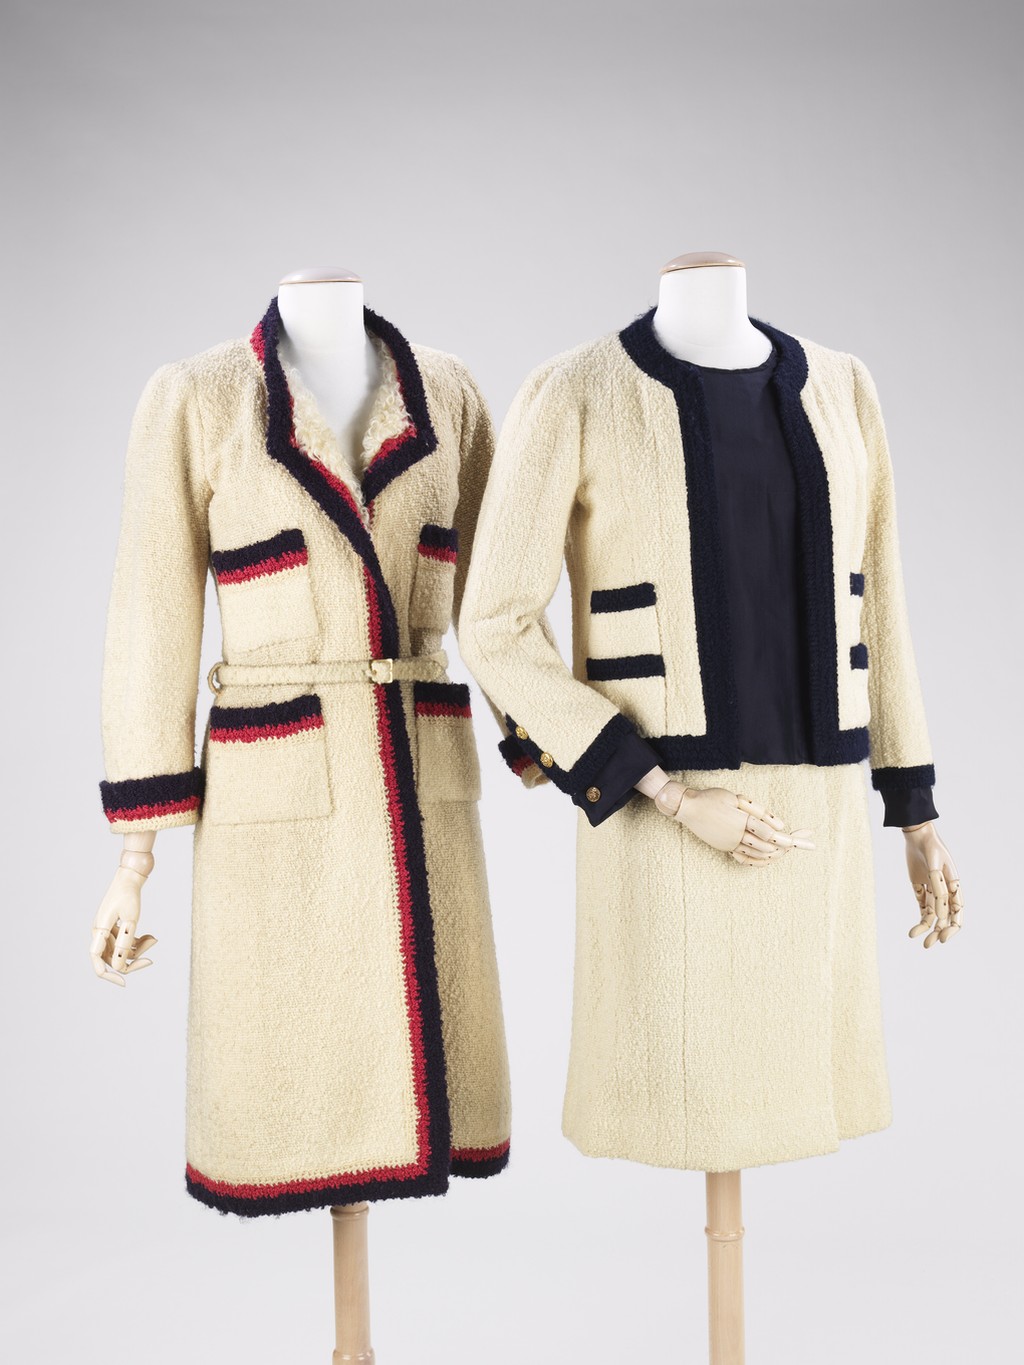 Here is a photo of two outfits Chanel designed from the mid-twentieth century. The piece on the left is a longer, belted coat with multi-colored trim. On the right is one of Chanel’s classic suits with navy trim.